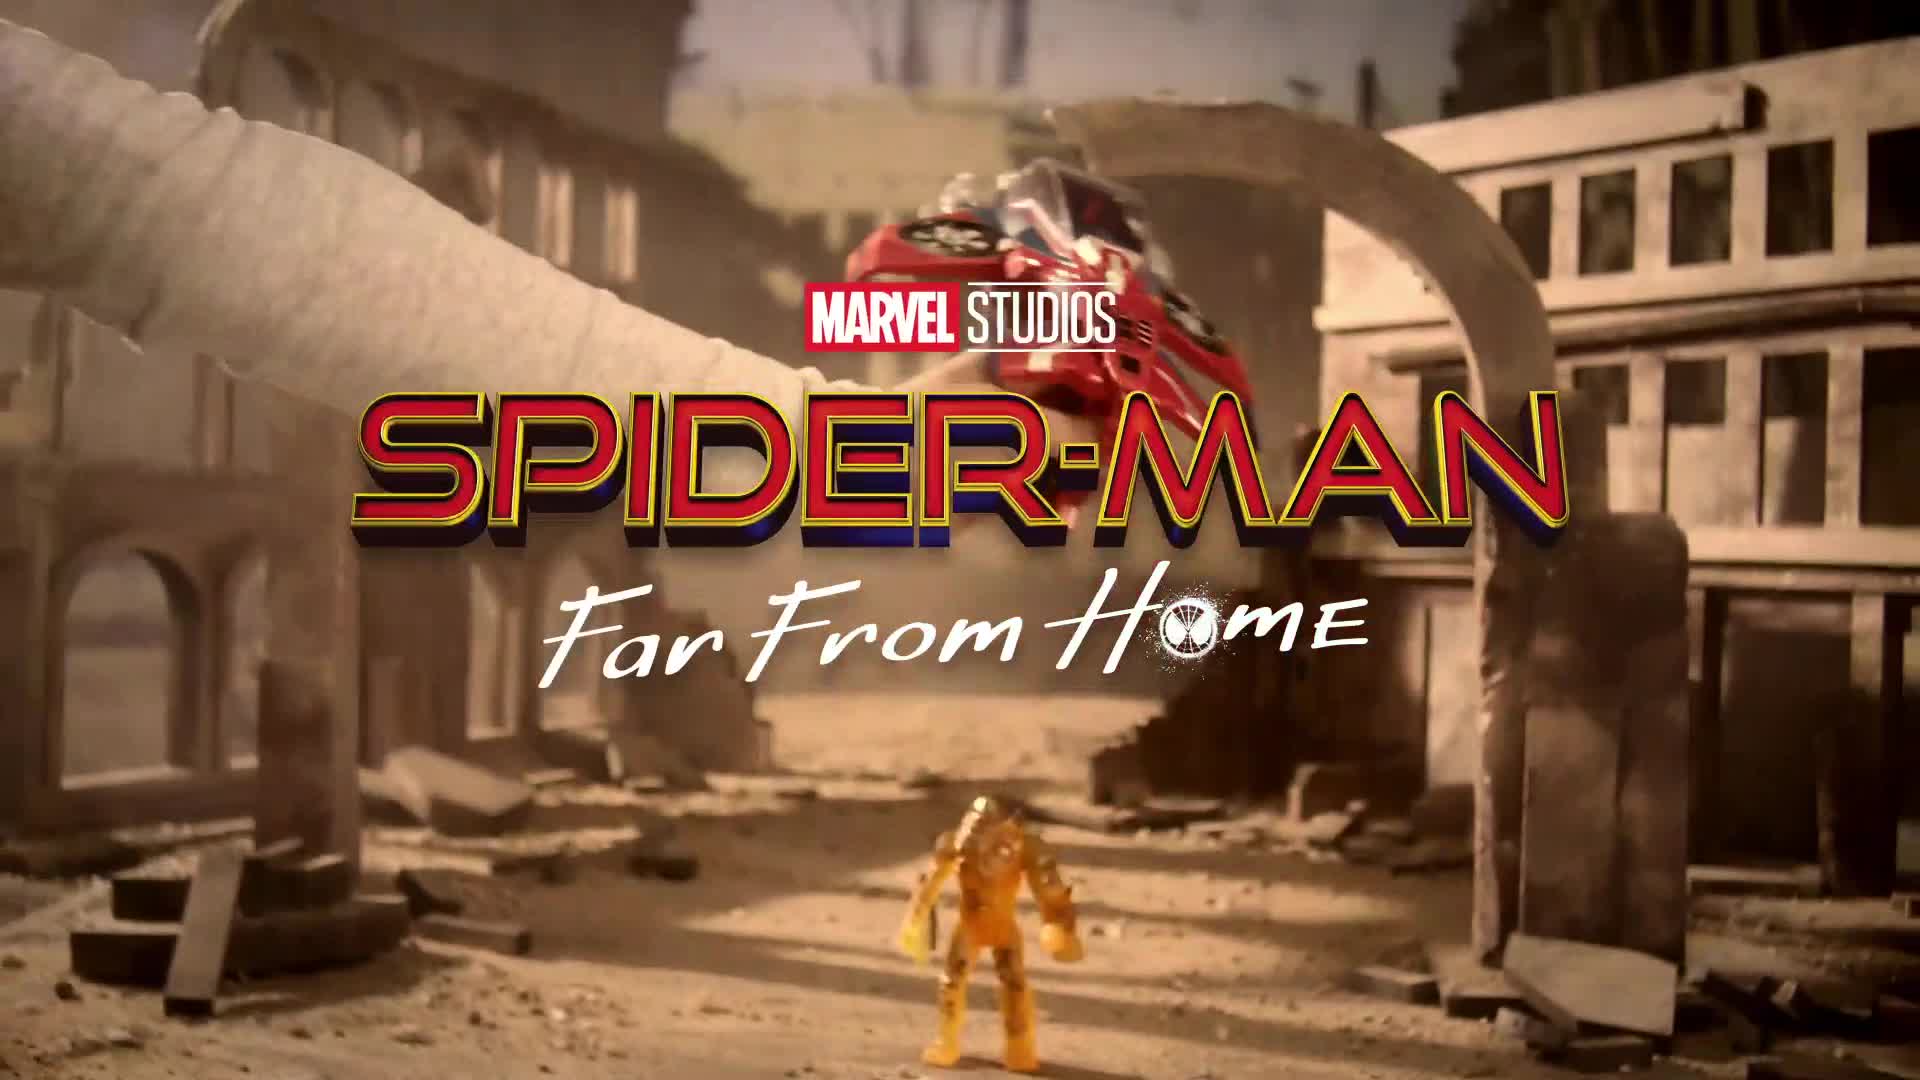 Spider-Man: Far From Home Lance-toiles cycloniques Spider-Man avec toile  liquide